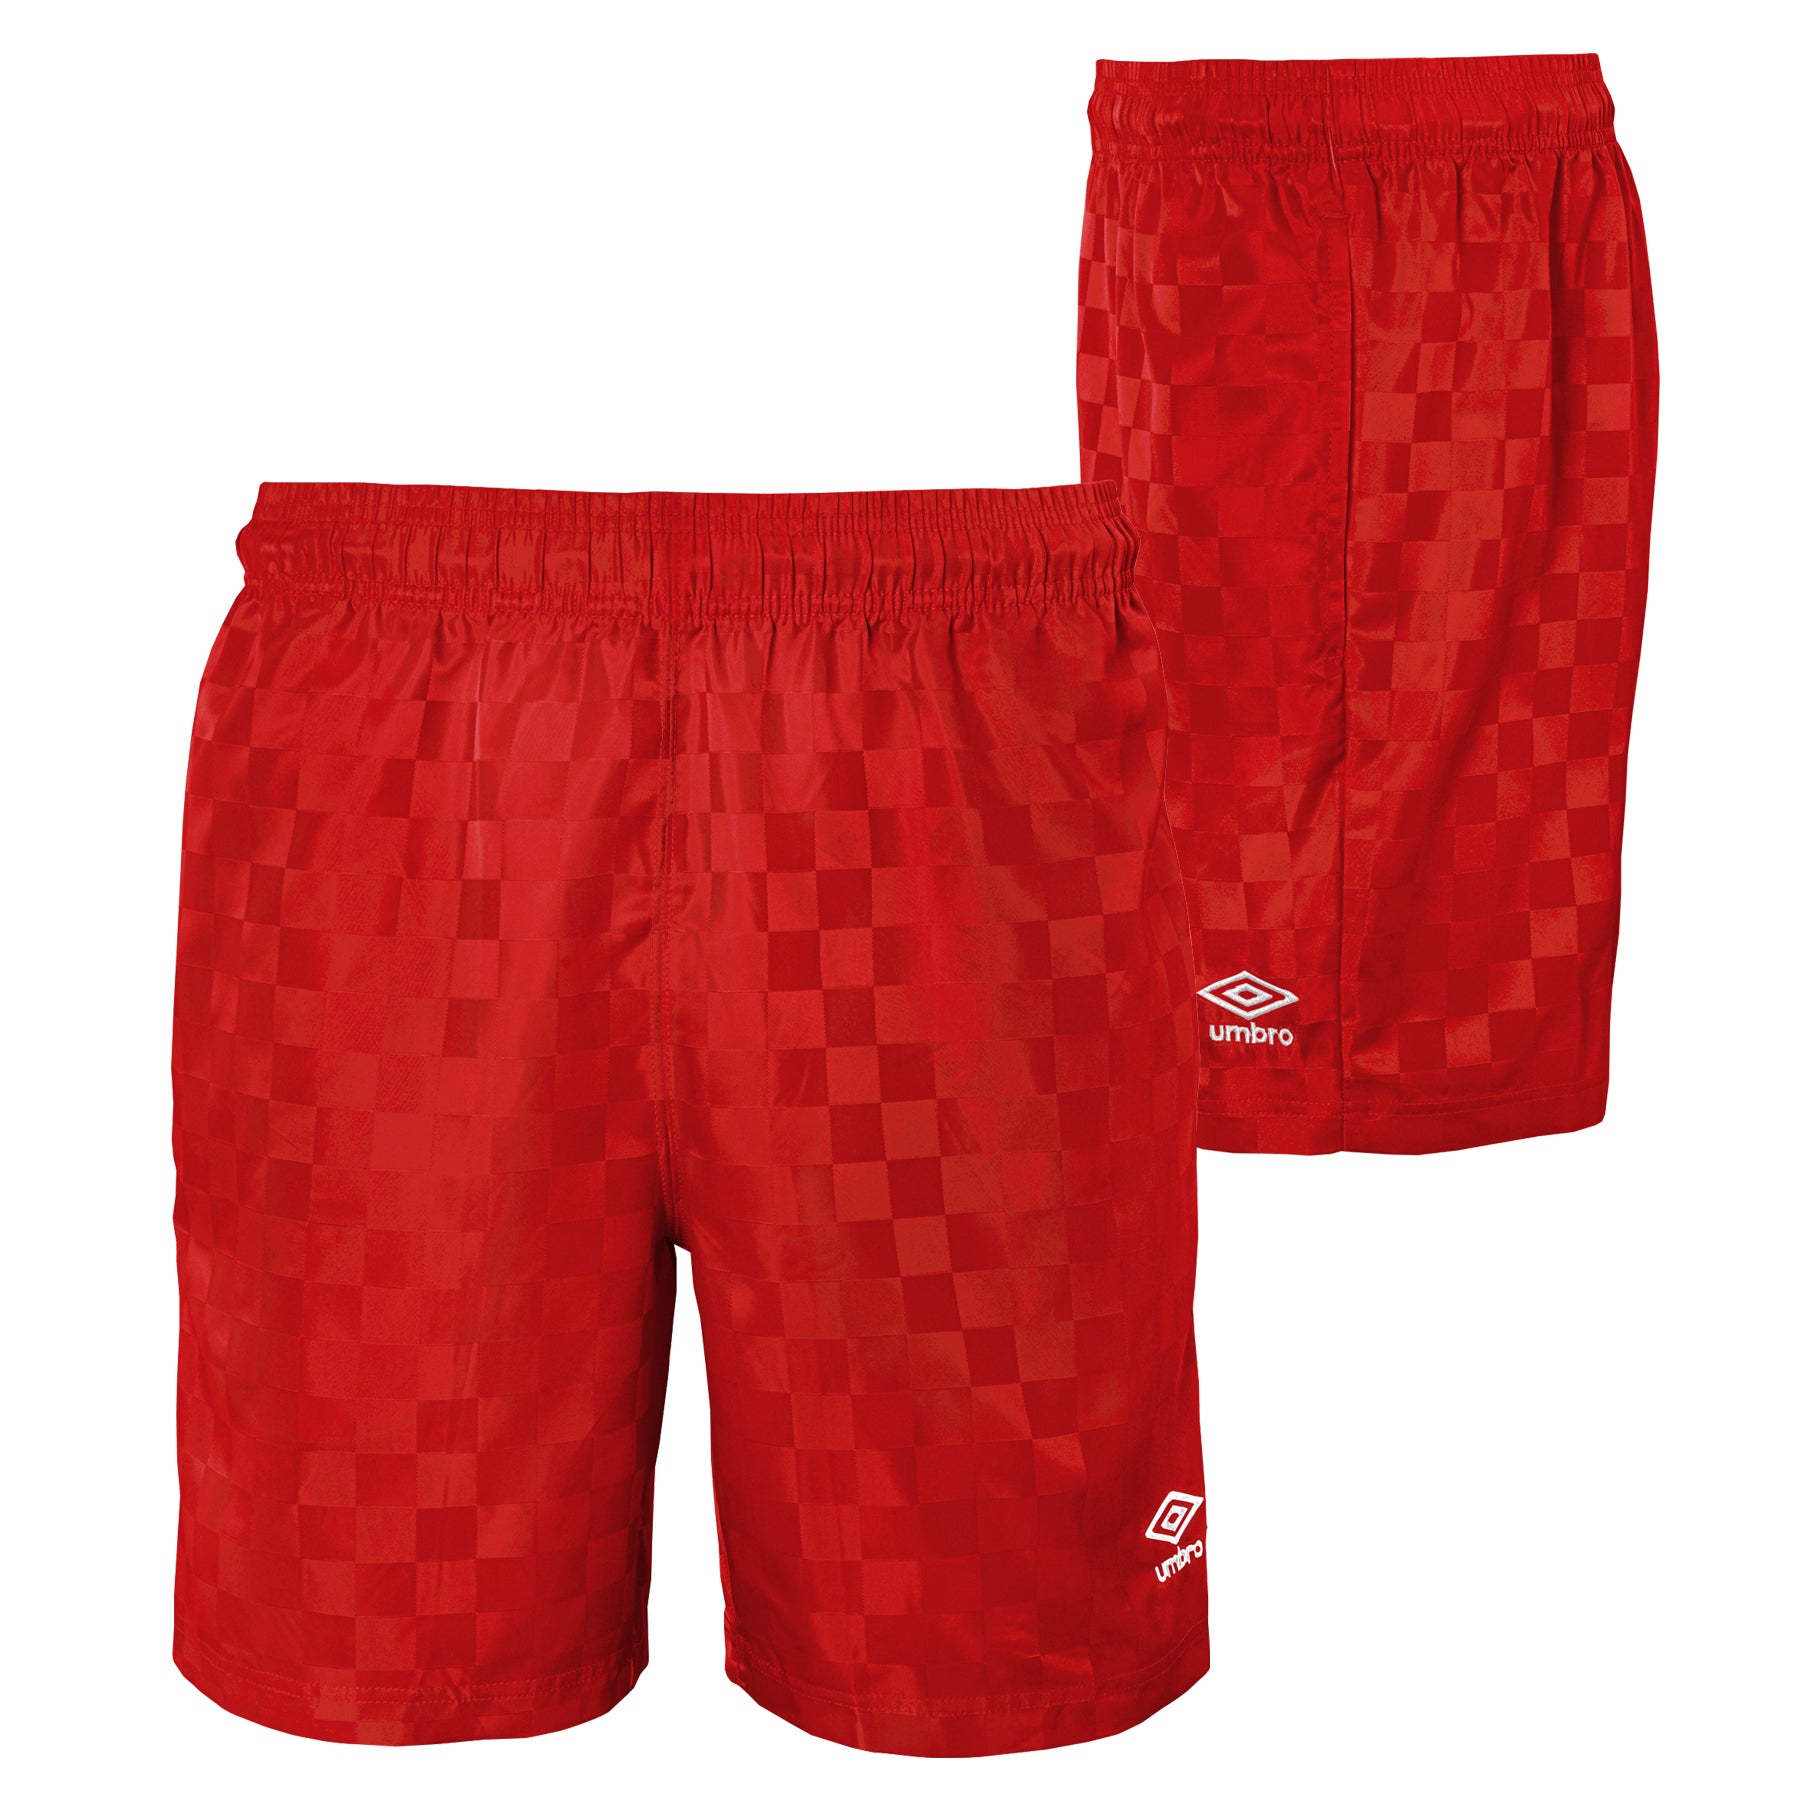 CHECKERBOARD SHORT-YOUTH